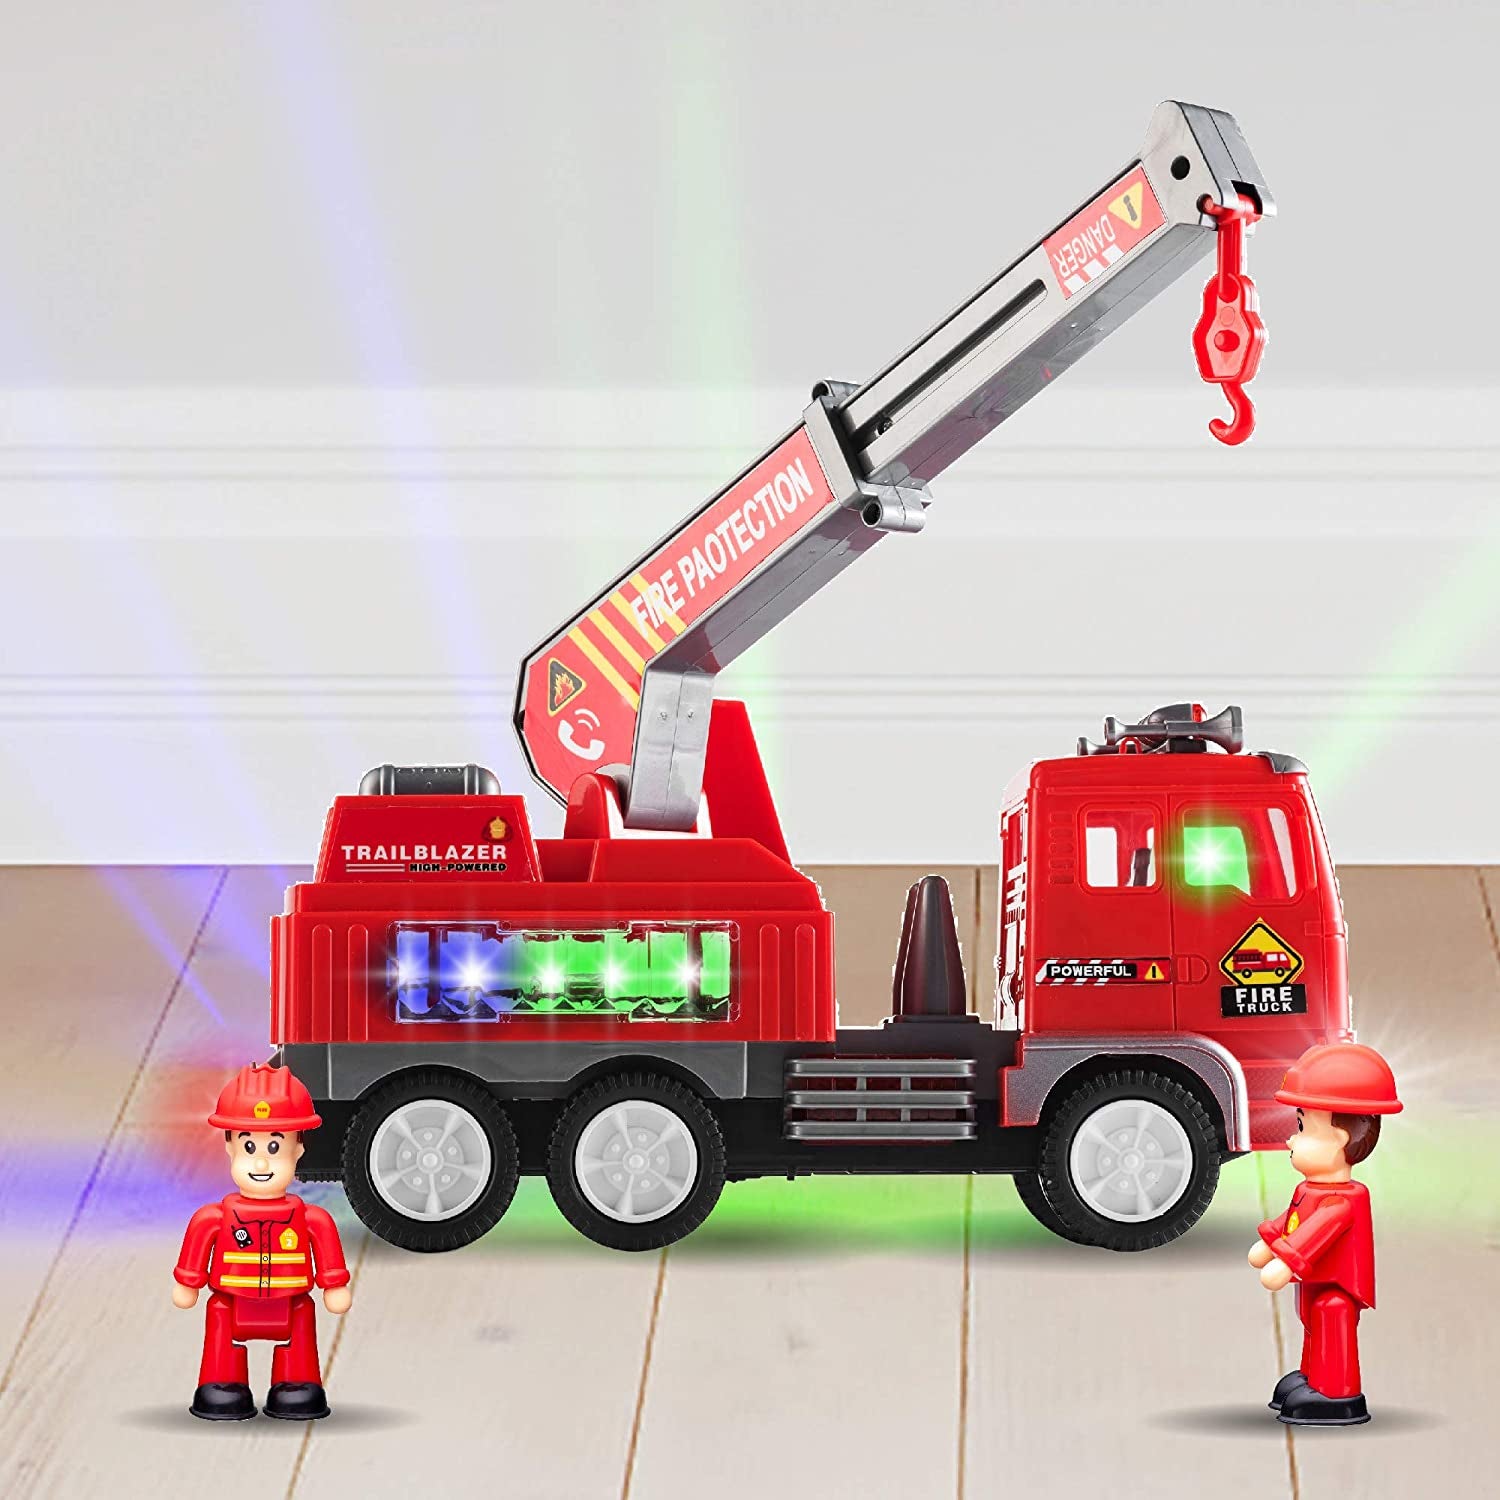 Fire Engine Ladder Truck for Kids with Two Fireman Figures - 4D Lights & Real Siren Sounds | Bump and Go Toy - Automatic Steering on Contact - Imaginative Play